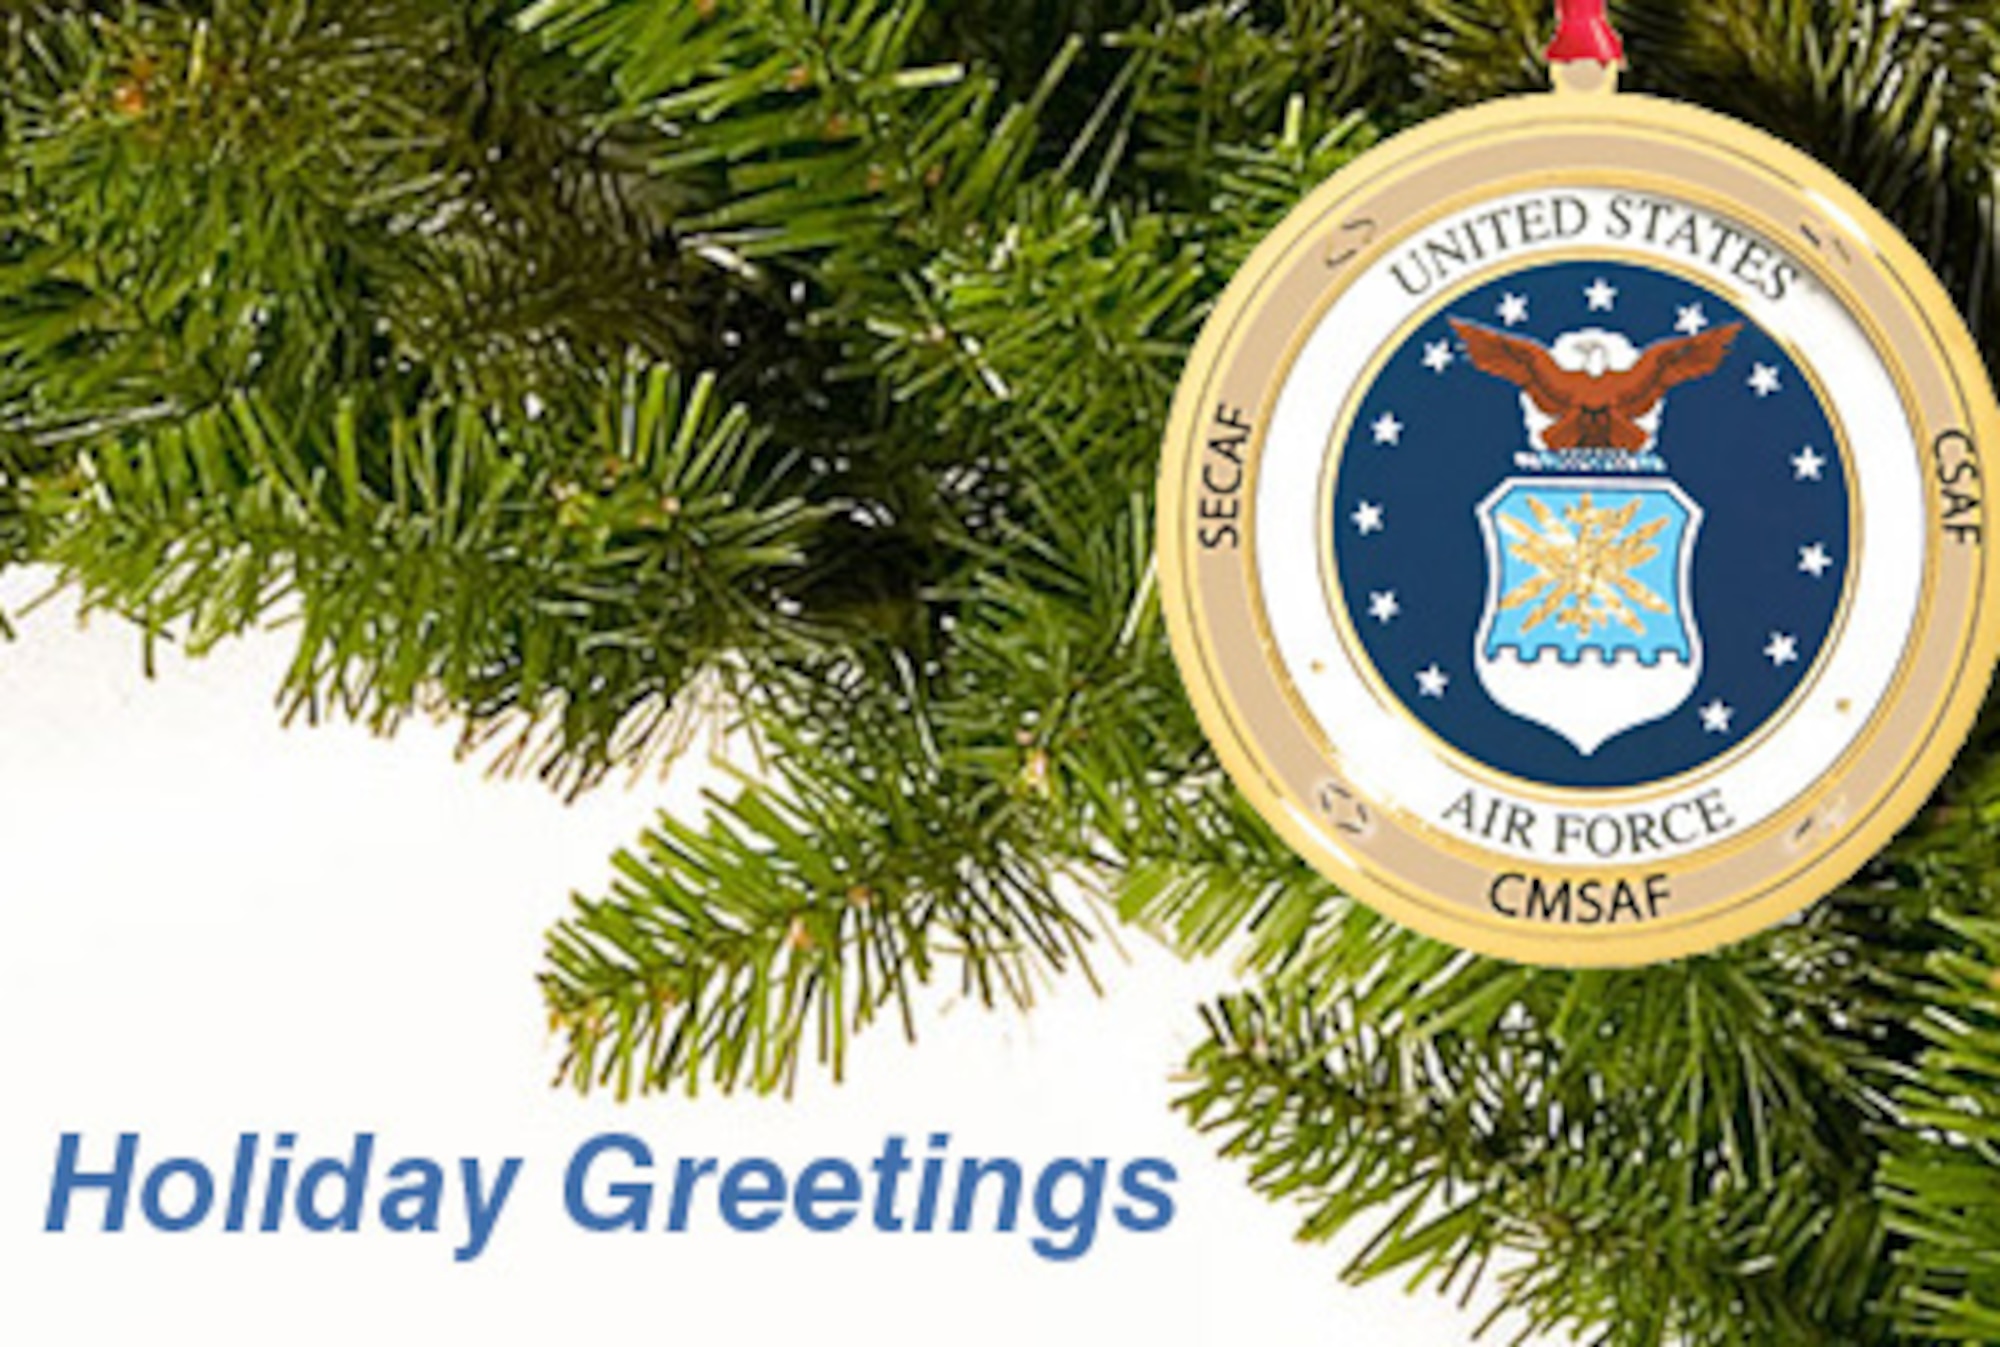 Secretary of the Air Force Michael B. Donley, Air Force Chief of Staff Gen. Norton Schwartz and Chief Master Sgt. of the Air Force James Roy send the Air Force family holiday greetings and remind all to remember those who are apart from family and friends. (Air Force illustration/Billy Smallwood)